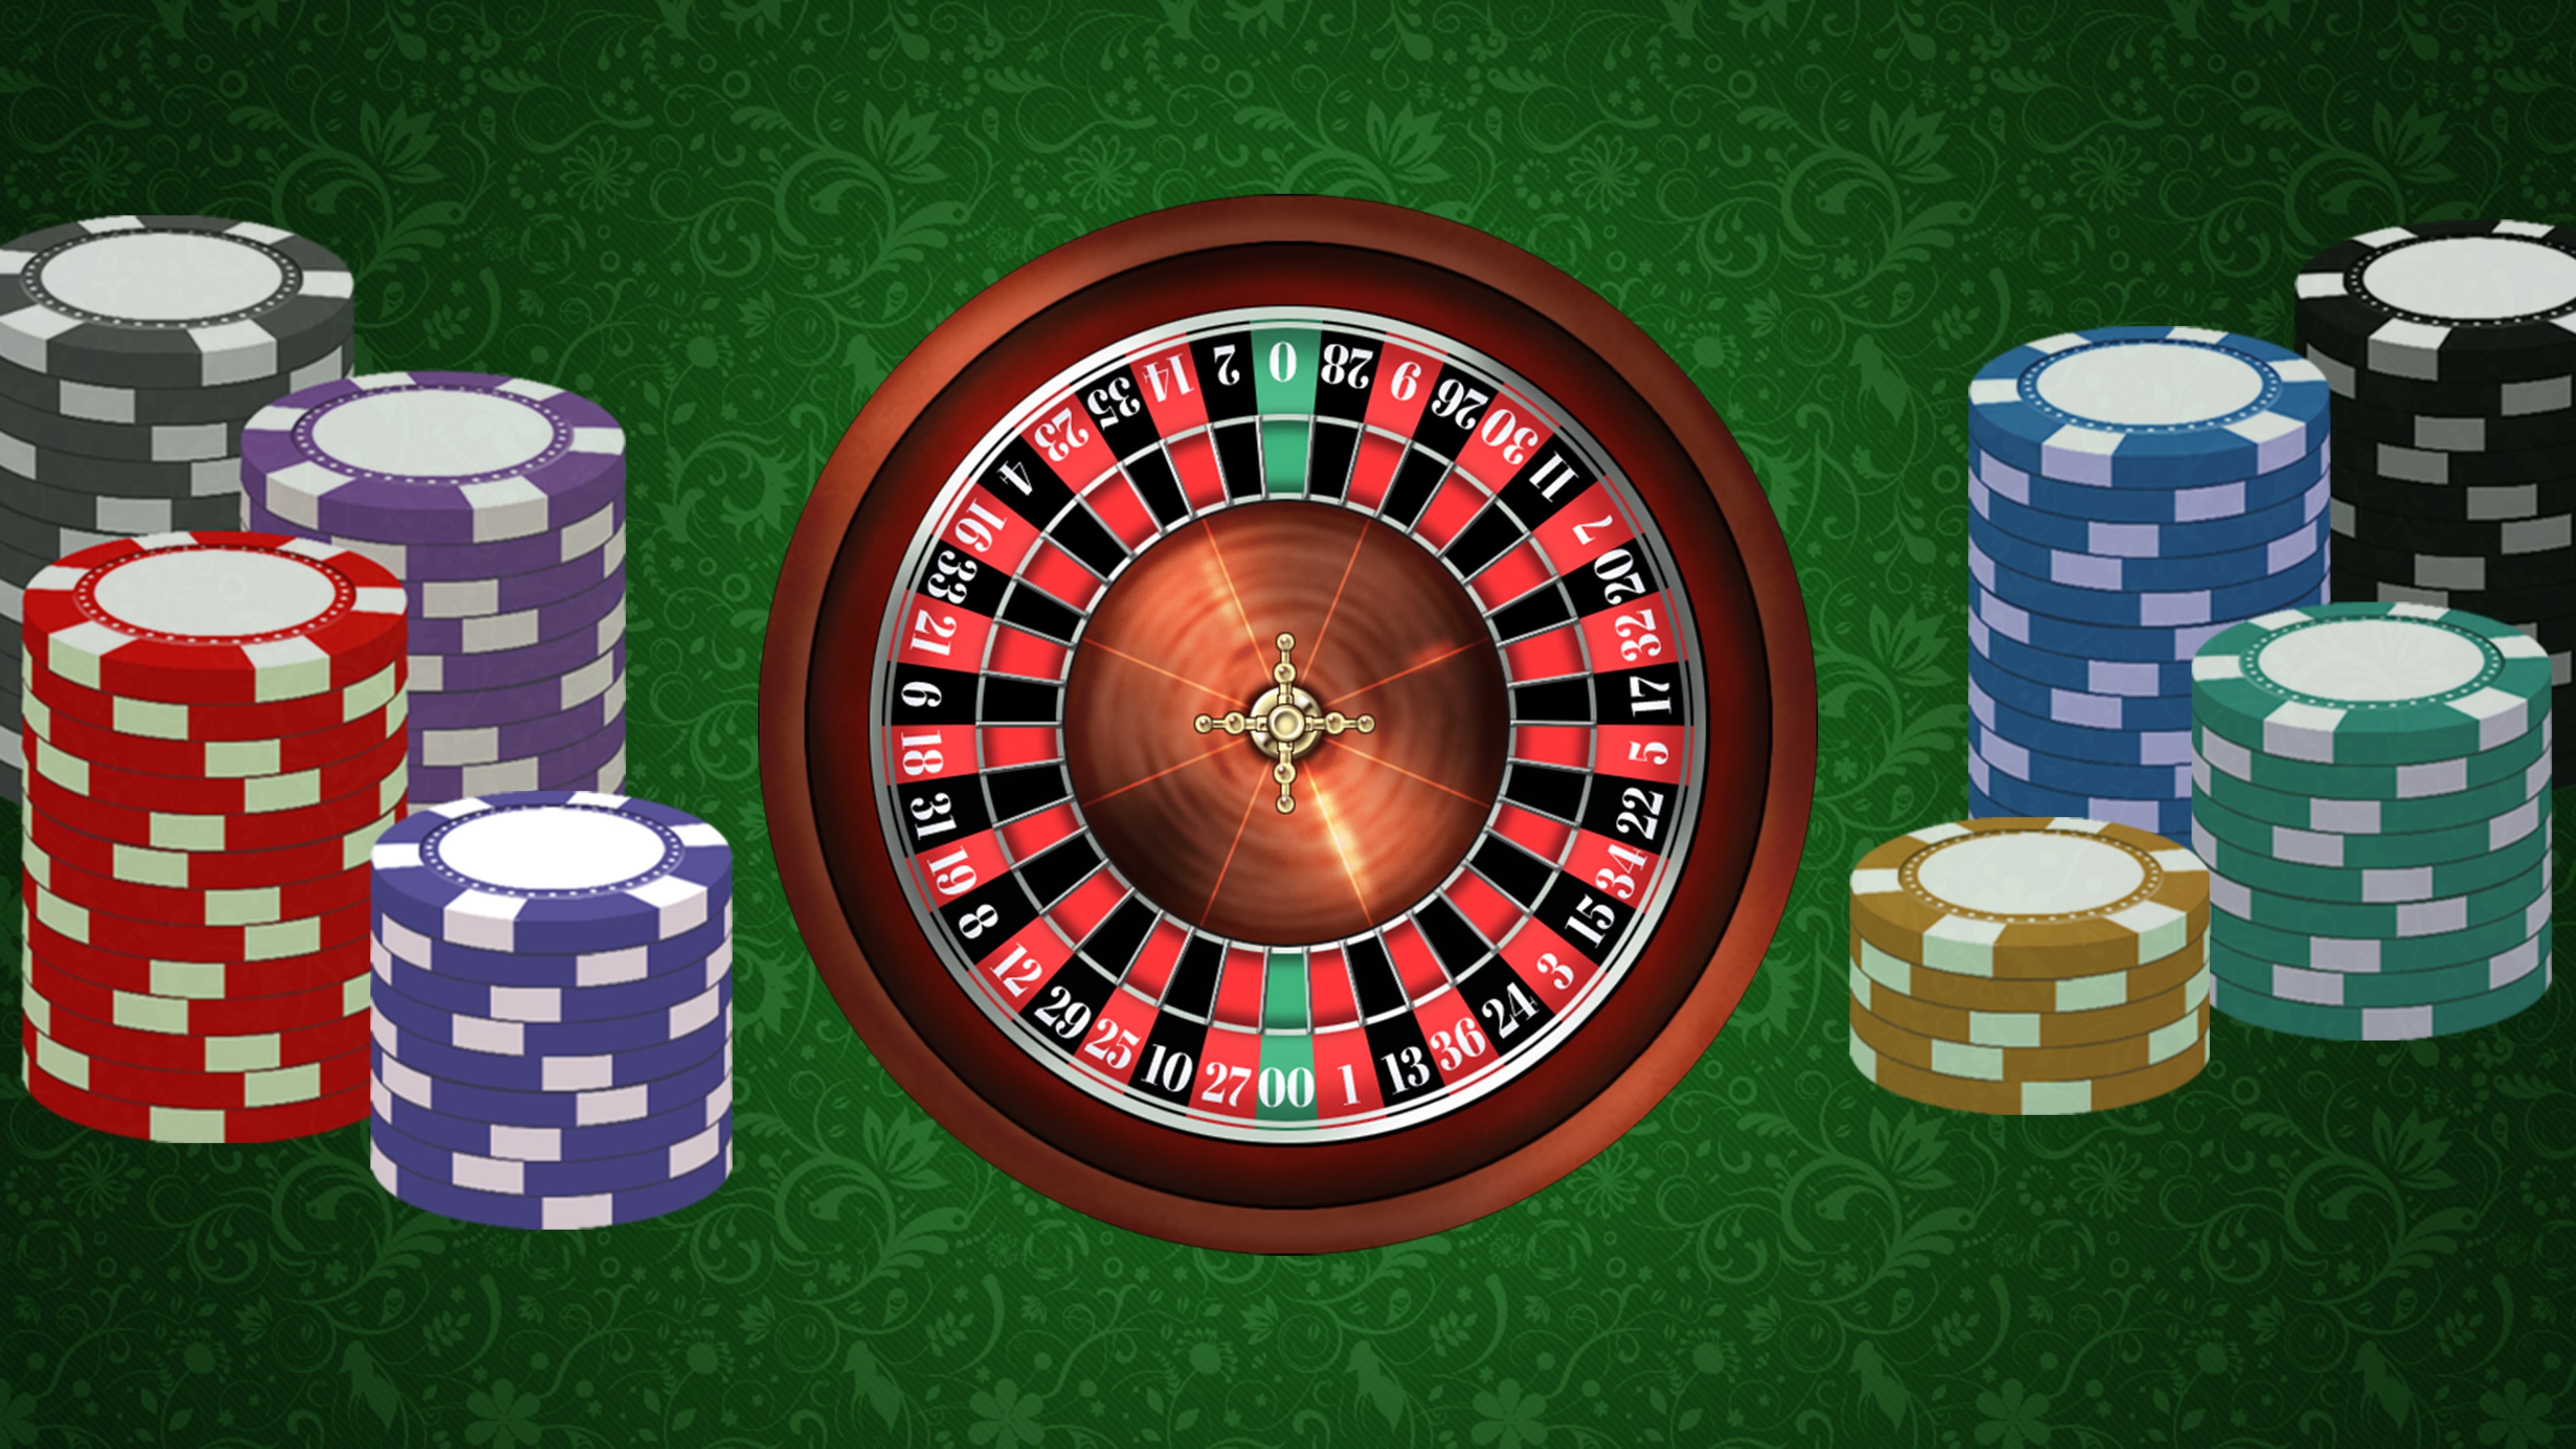 How To Make Your Product Stand Out With harrahs casino